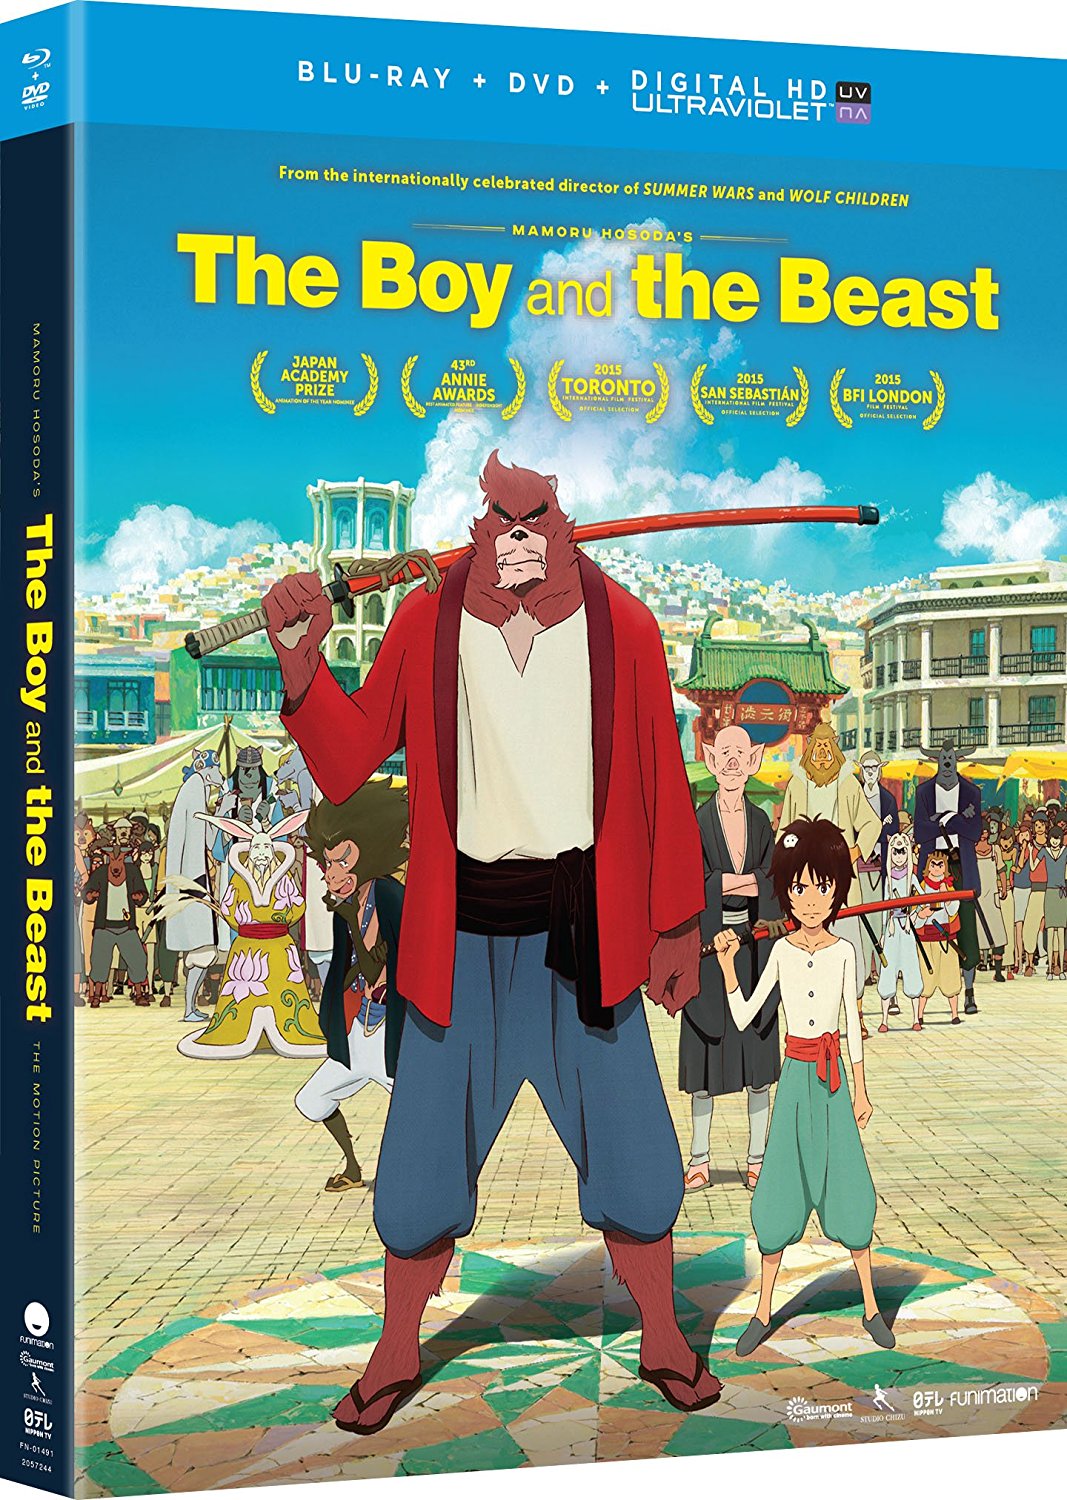 Amazing The Boy And The Beast Pictures & Backgrounds